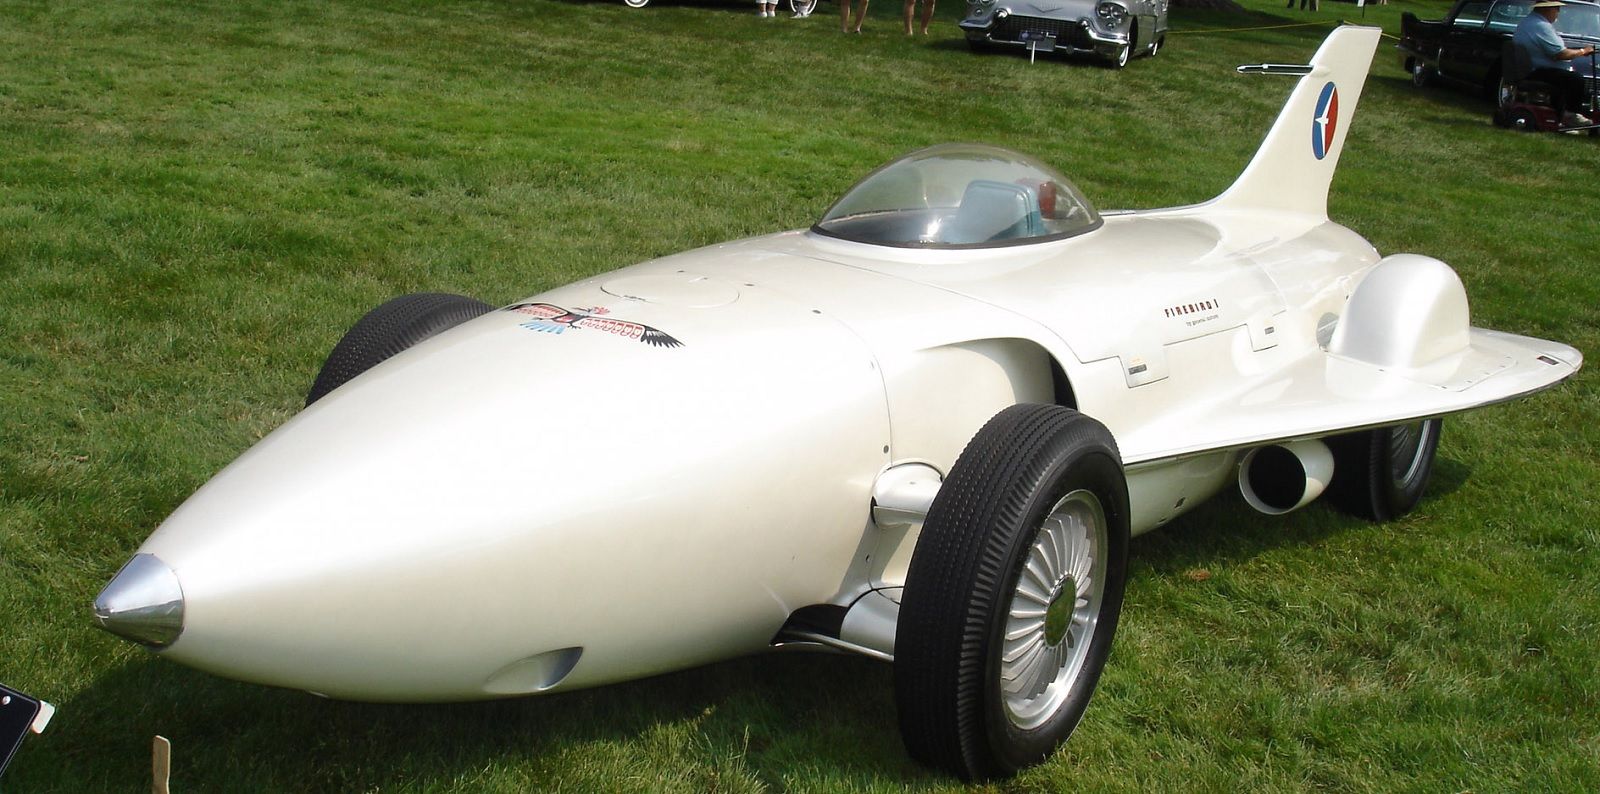 30 Incredibly Bonkers And Beautiful Cars From The 1950s To Now photo 2